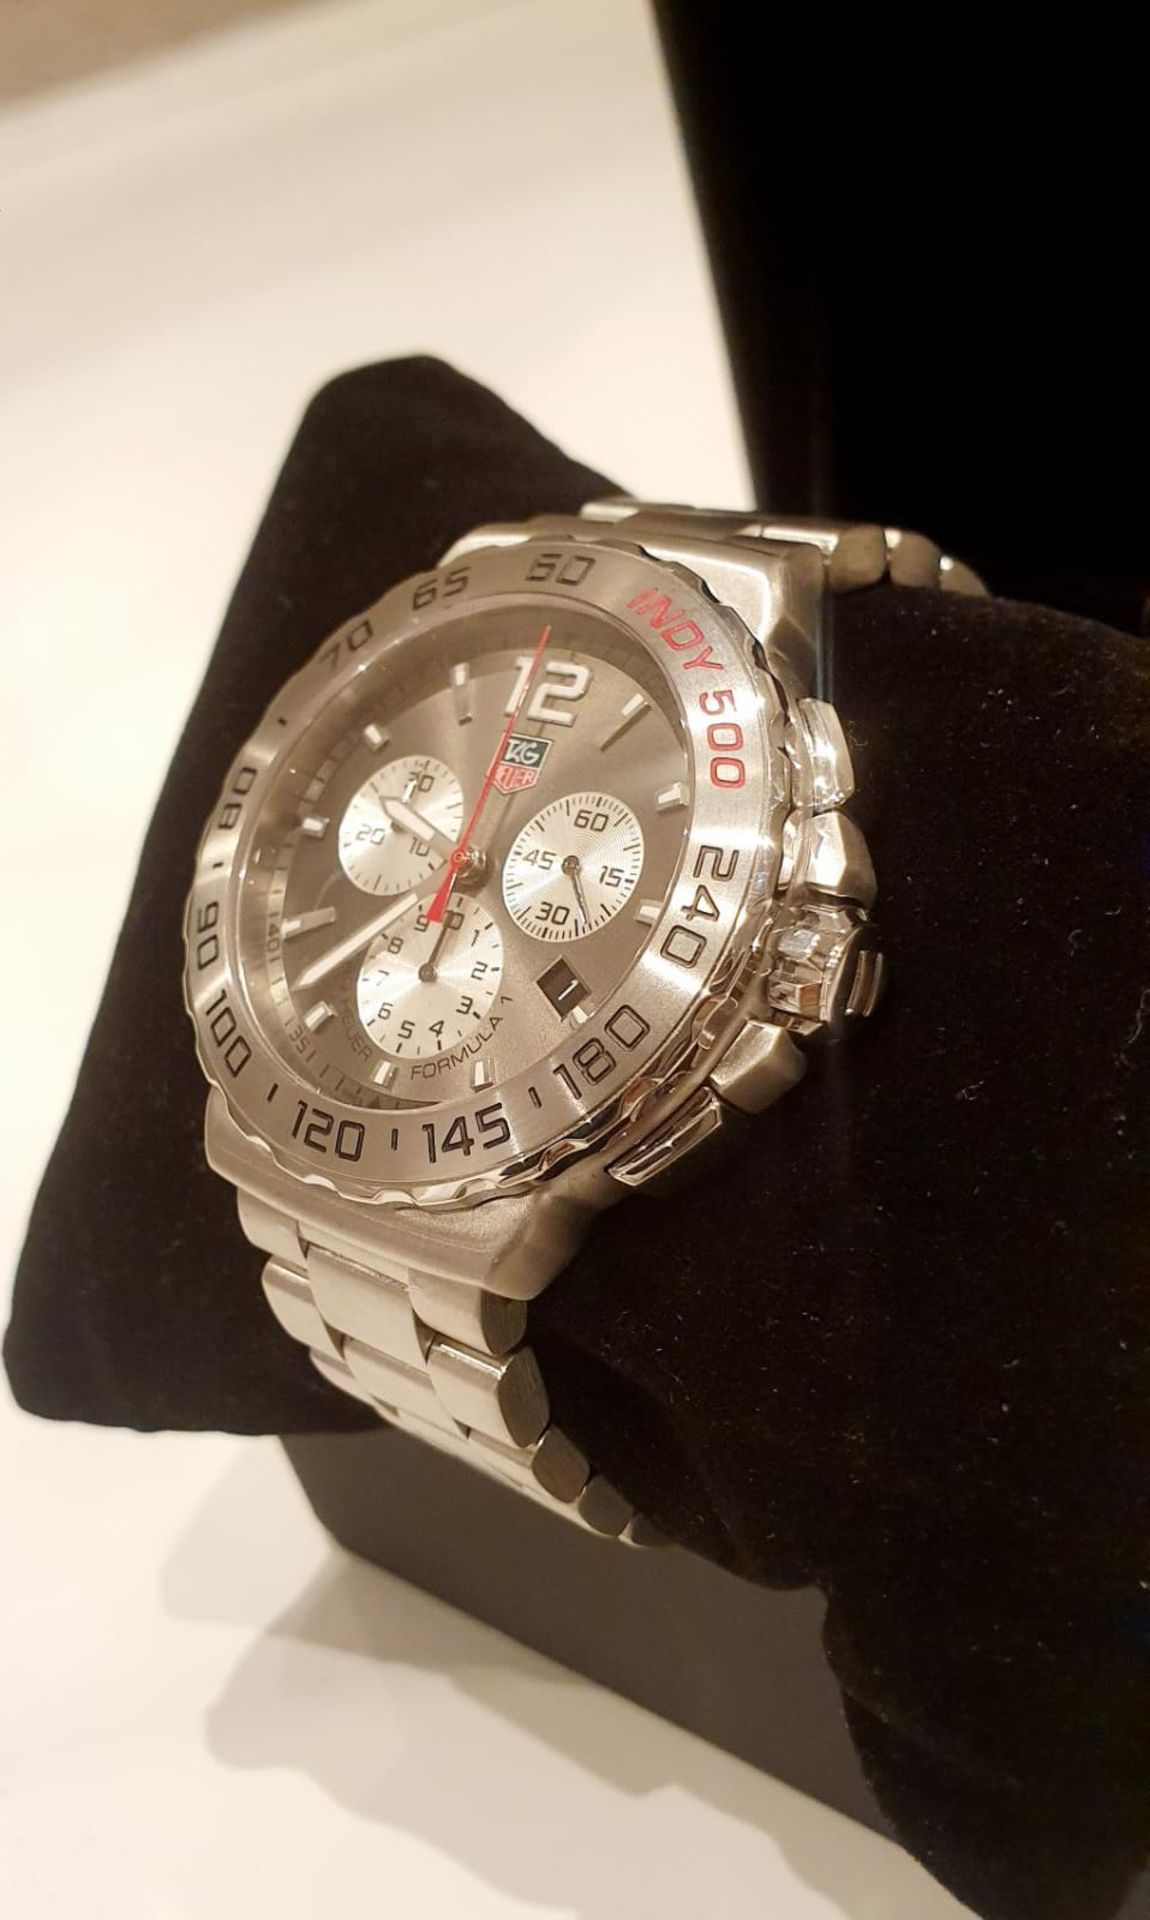 TAG HEUER INDY 500 MENS CHRONOGRAPH WATCH NO VAT - Image 4 of 9